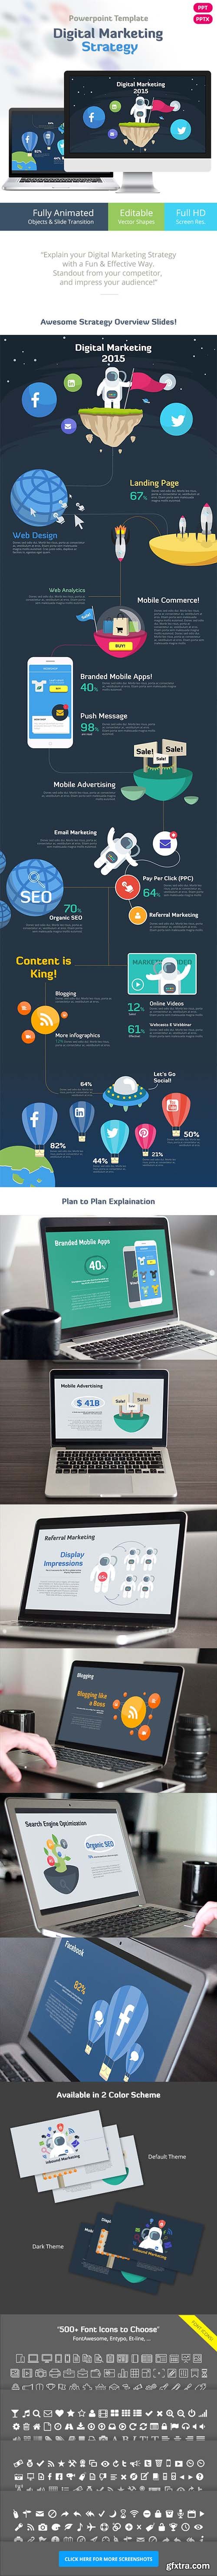 Graphicriver Digital Marketing - Powerpoint Template 10472343